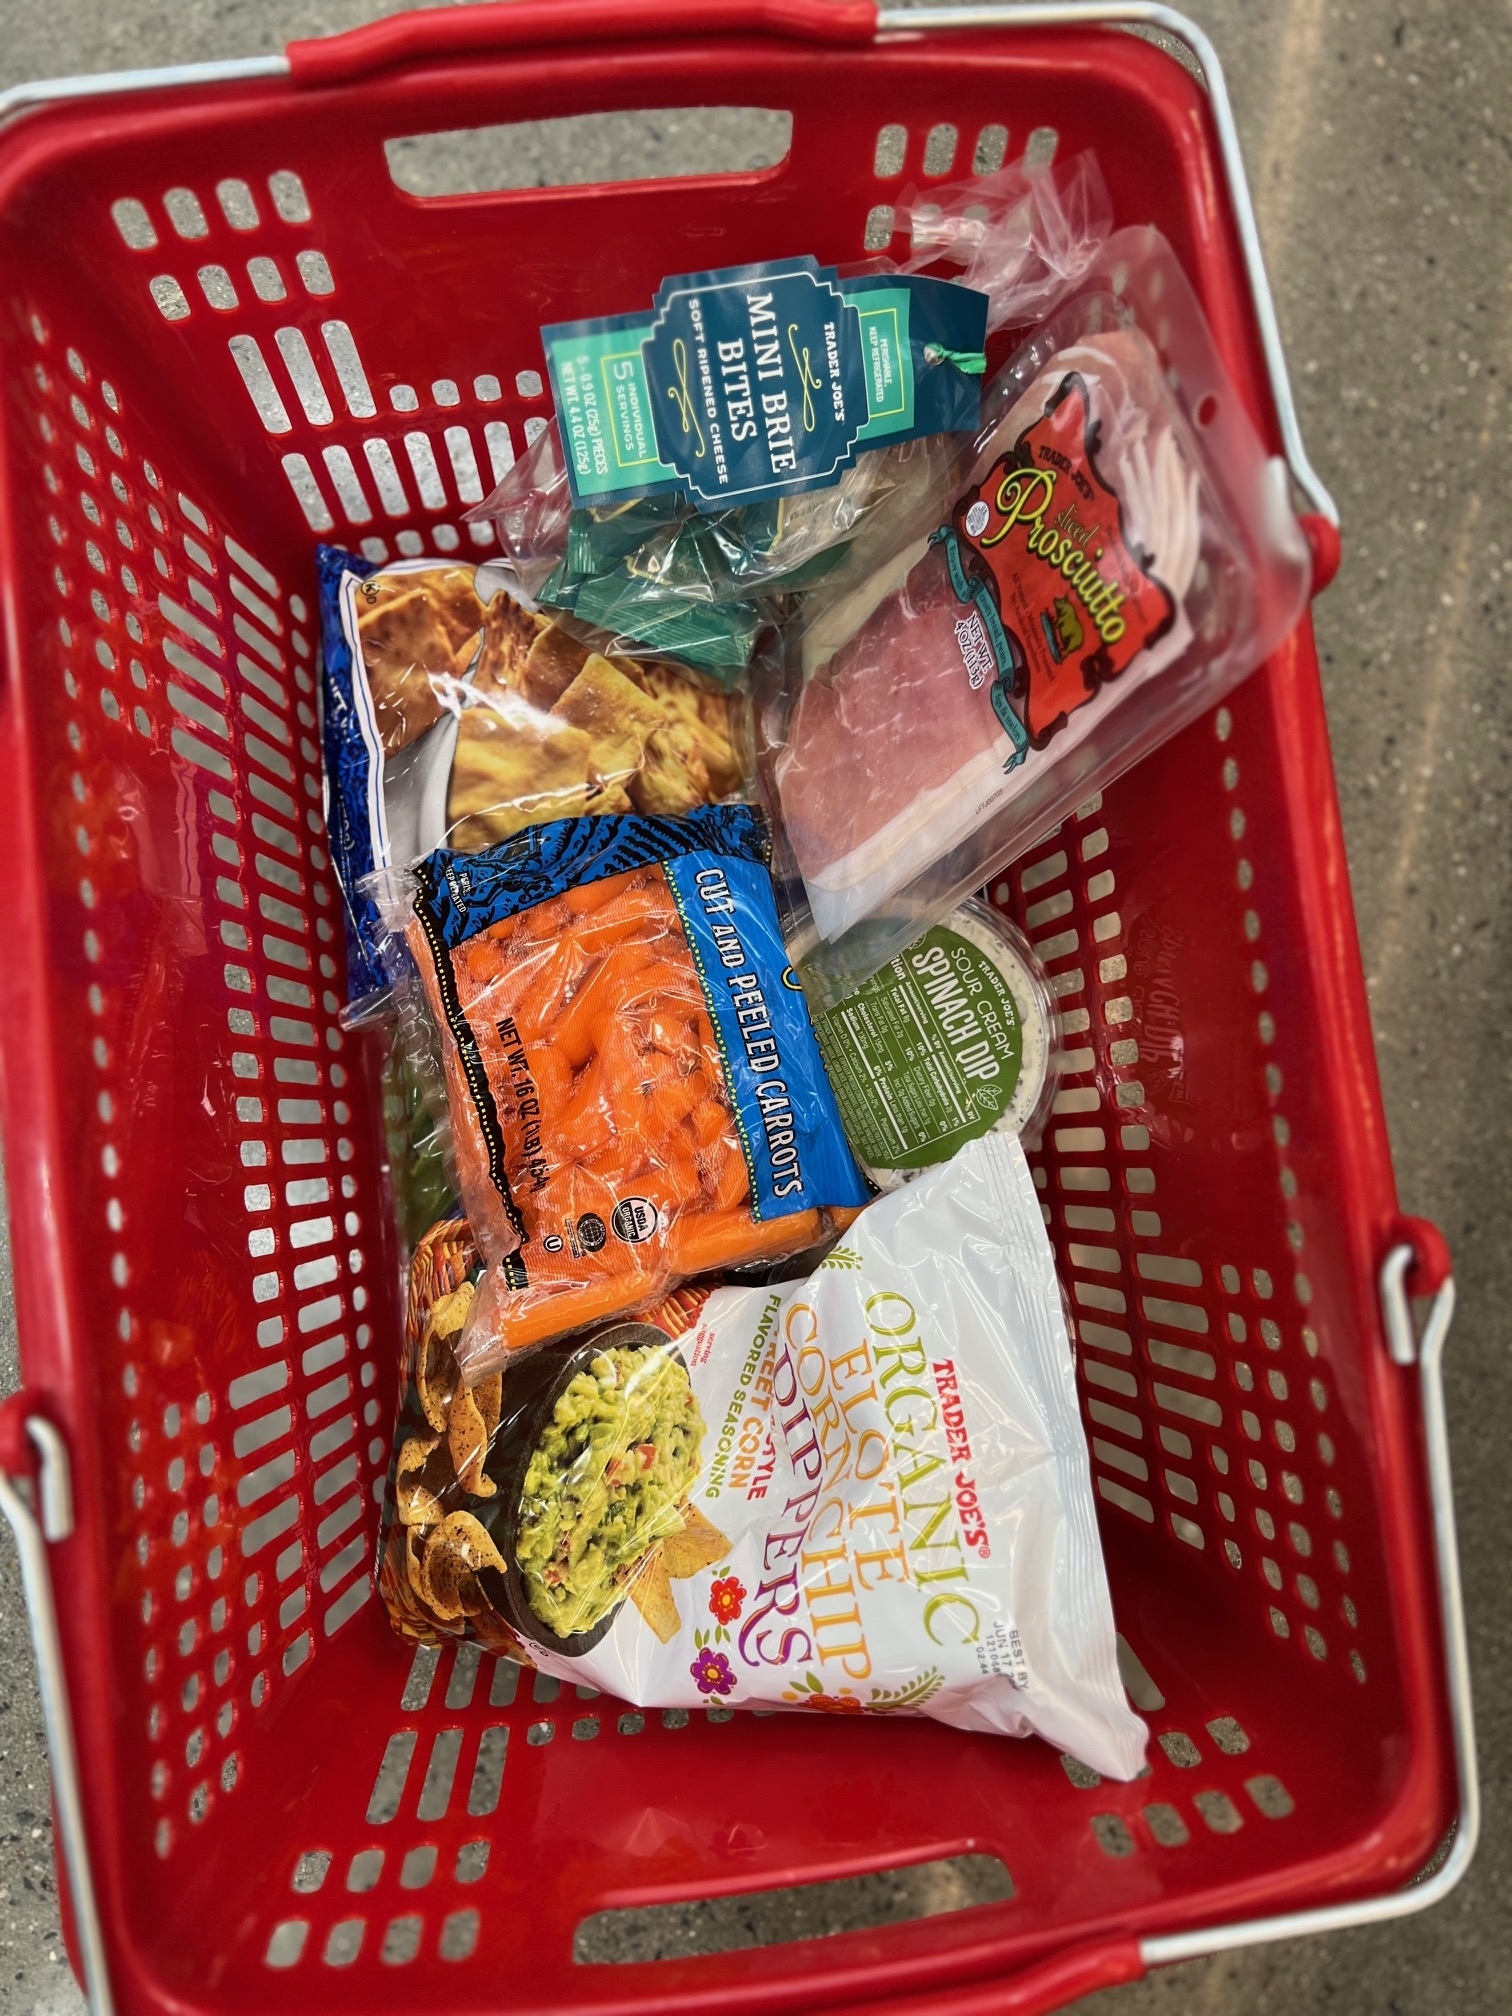 Shopping basket filled with various food items, including chips, salad mix, and packaged meat